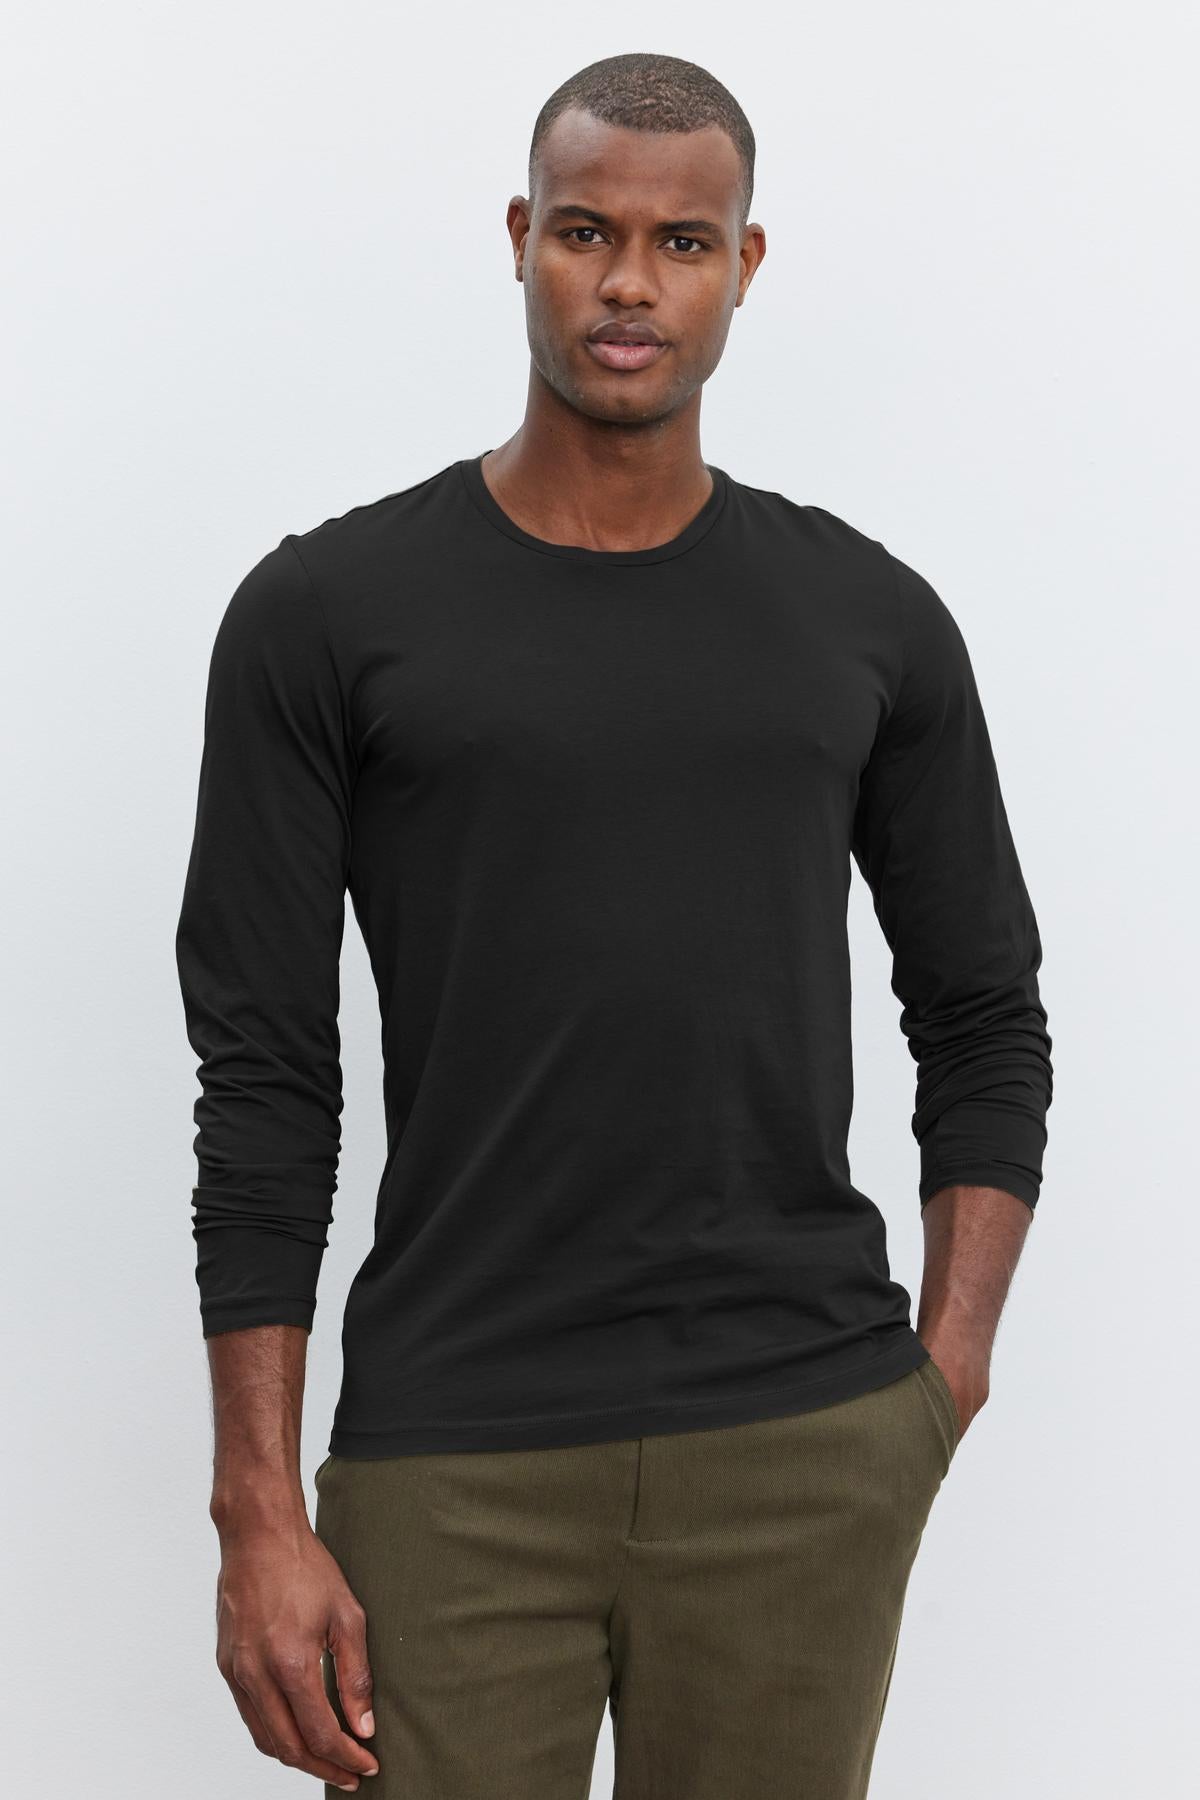 A young man in a black Velvet by Graham & Spencer SKEETER WHISPER CLASSIC CREW NECK TEE and olive green pants, standing against a white background.-36342439182529